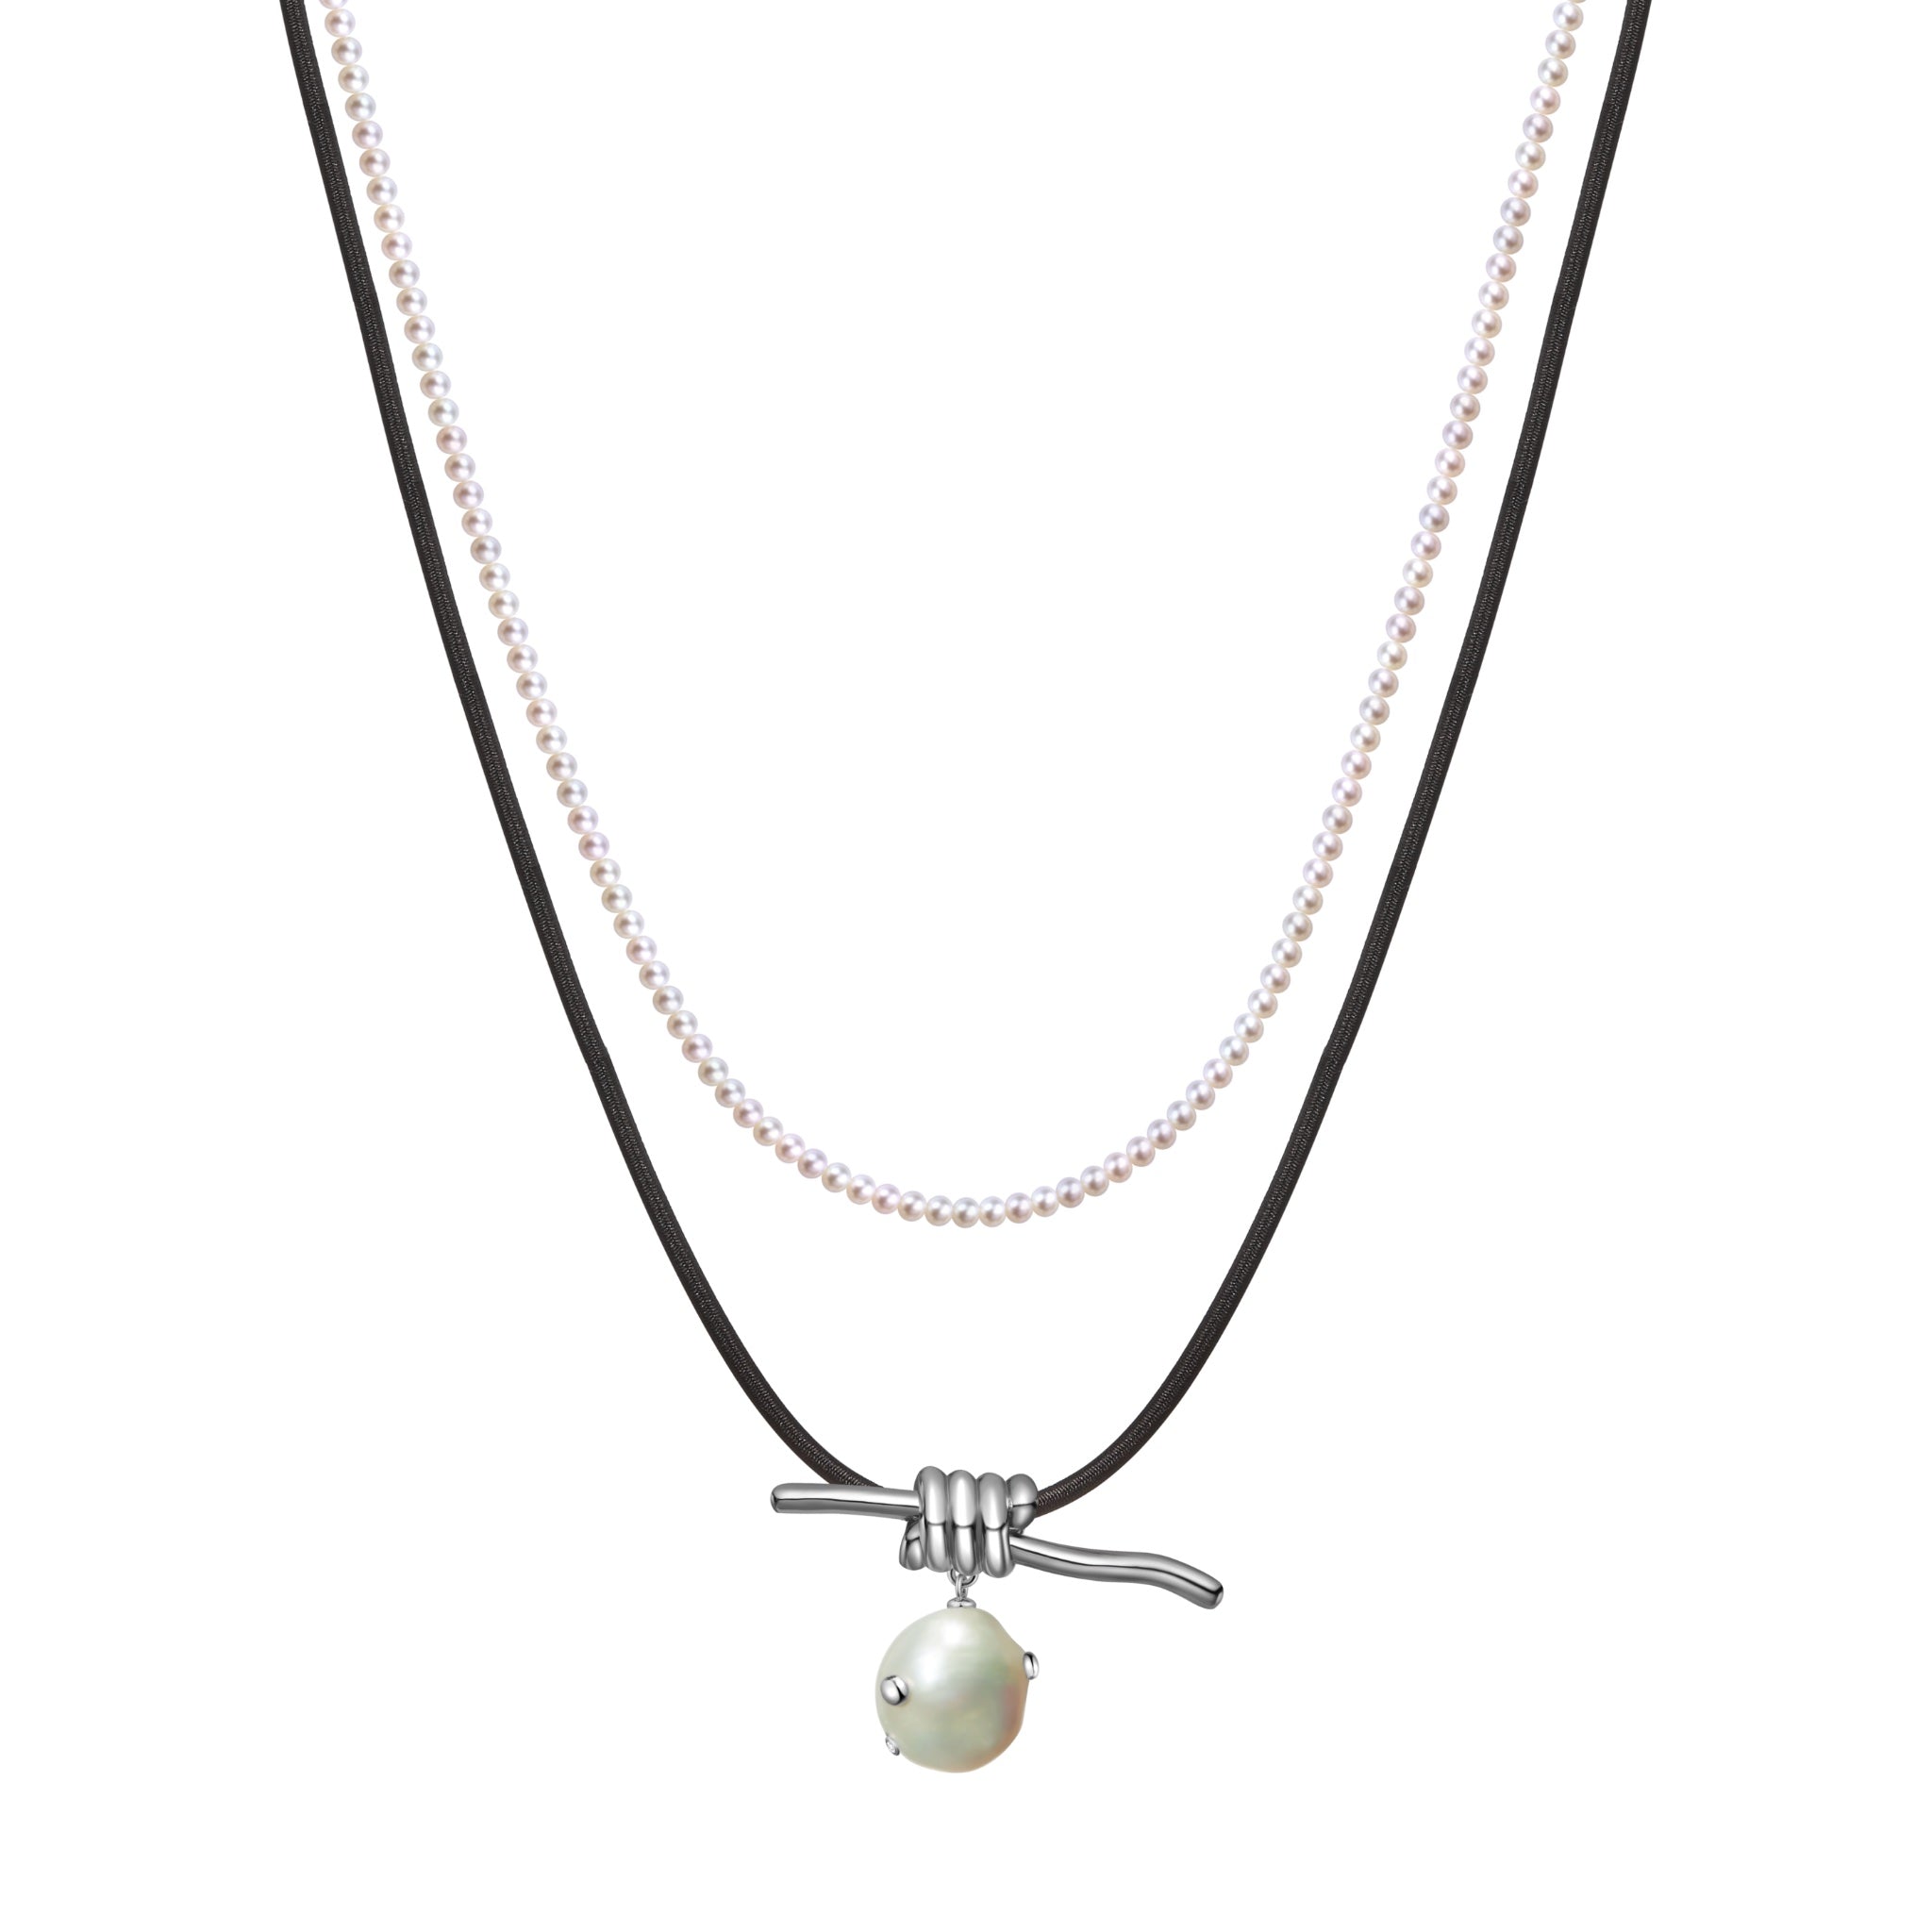 LOST IN ECHO Black Stretch Knot Double Layer Pearl Necklace | MADA IN CHINA